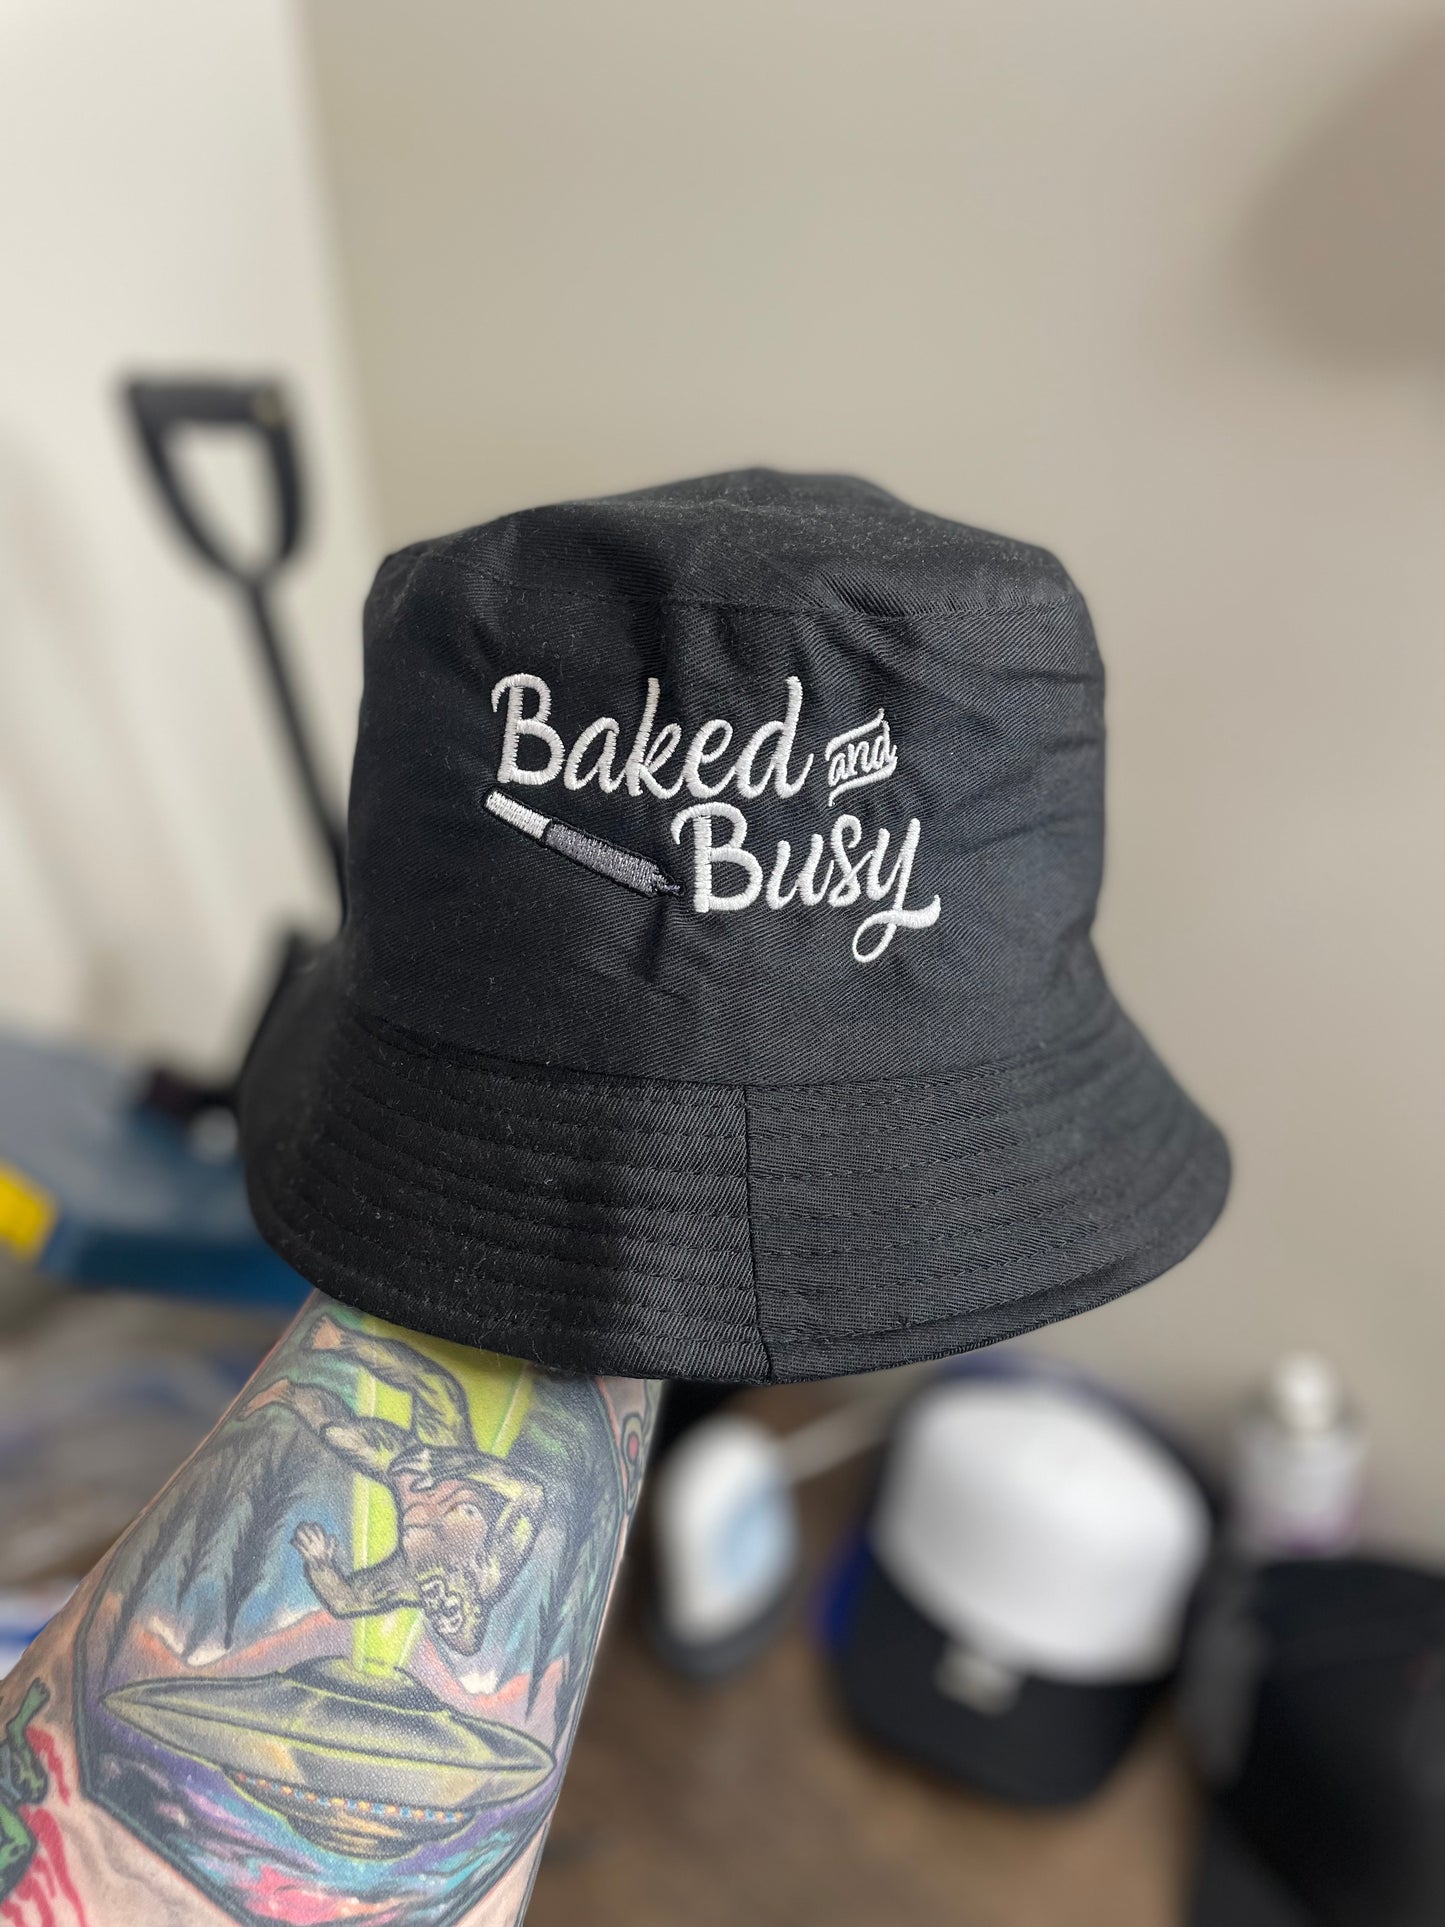 NEW Baked&Busy Bucket Hats